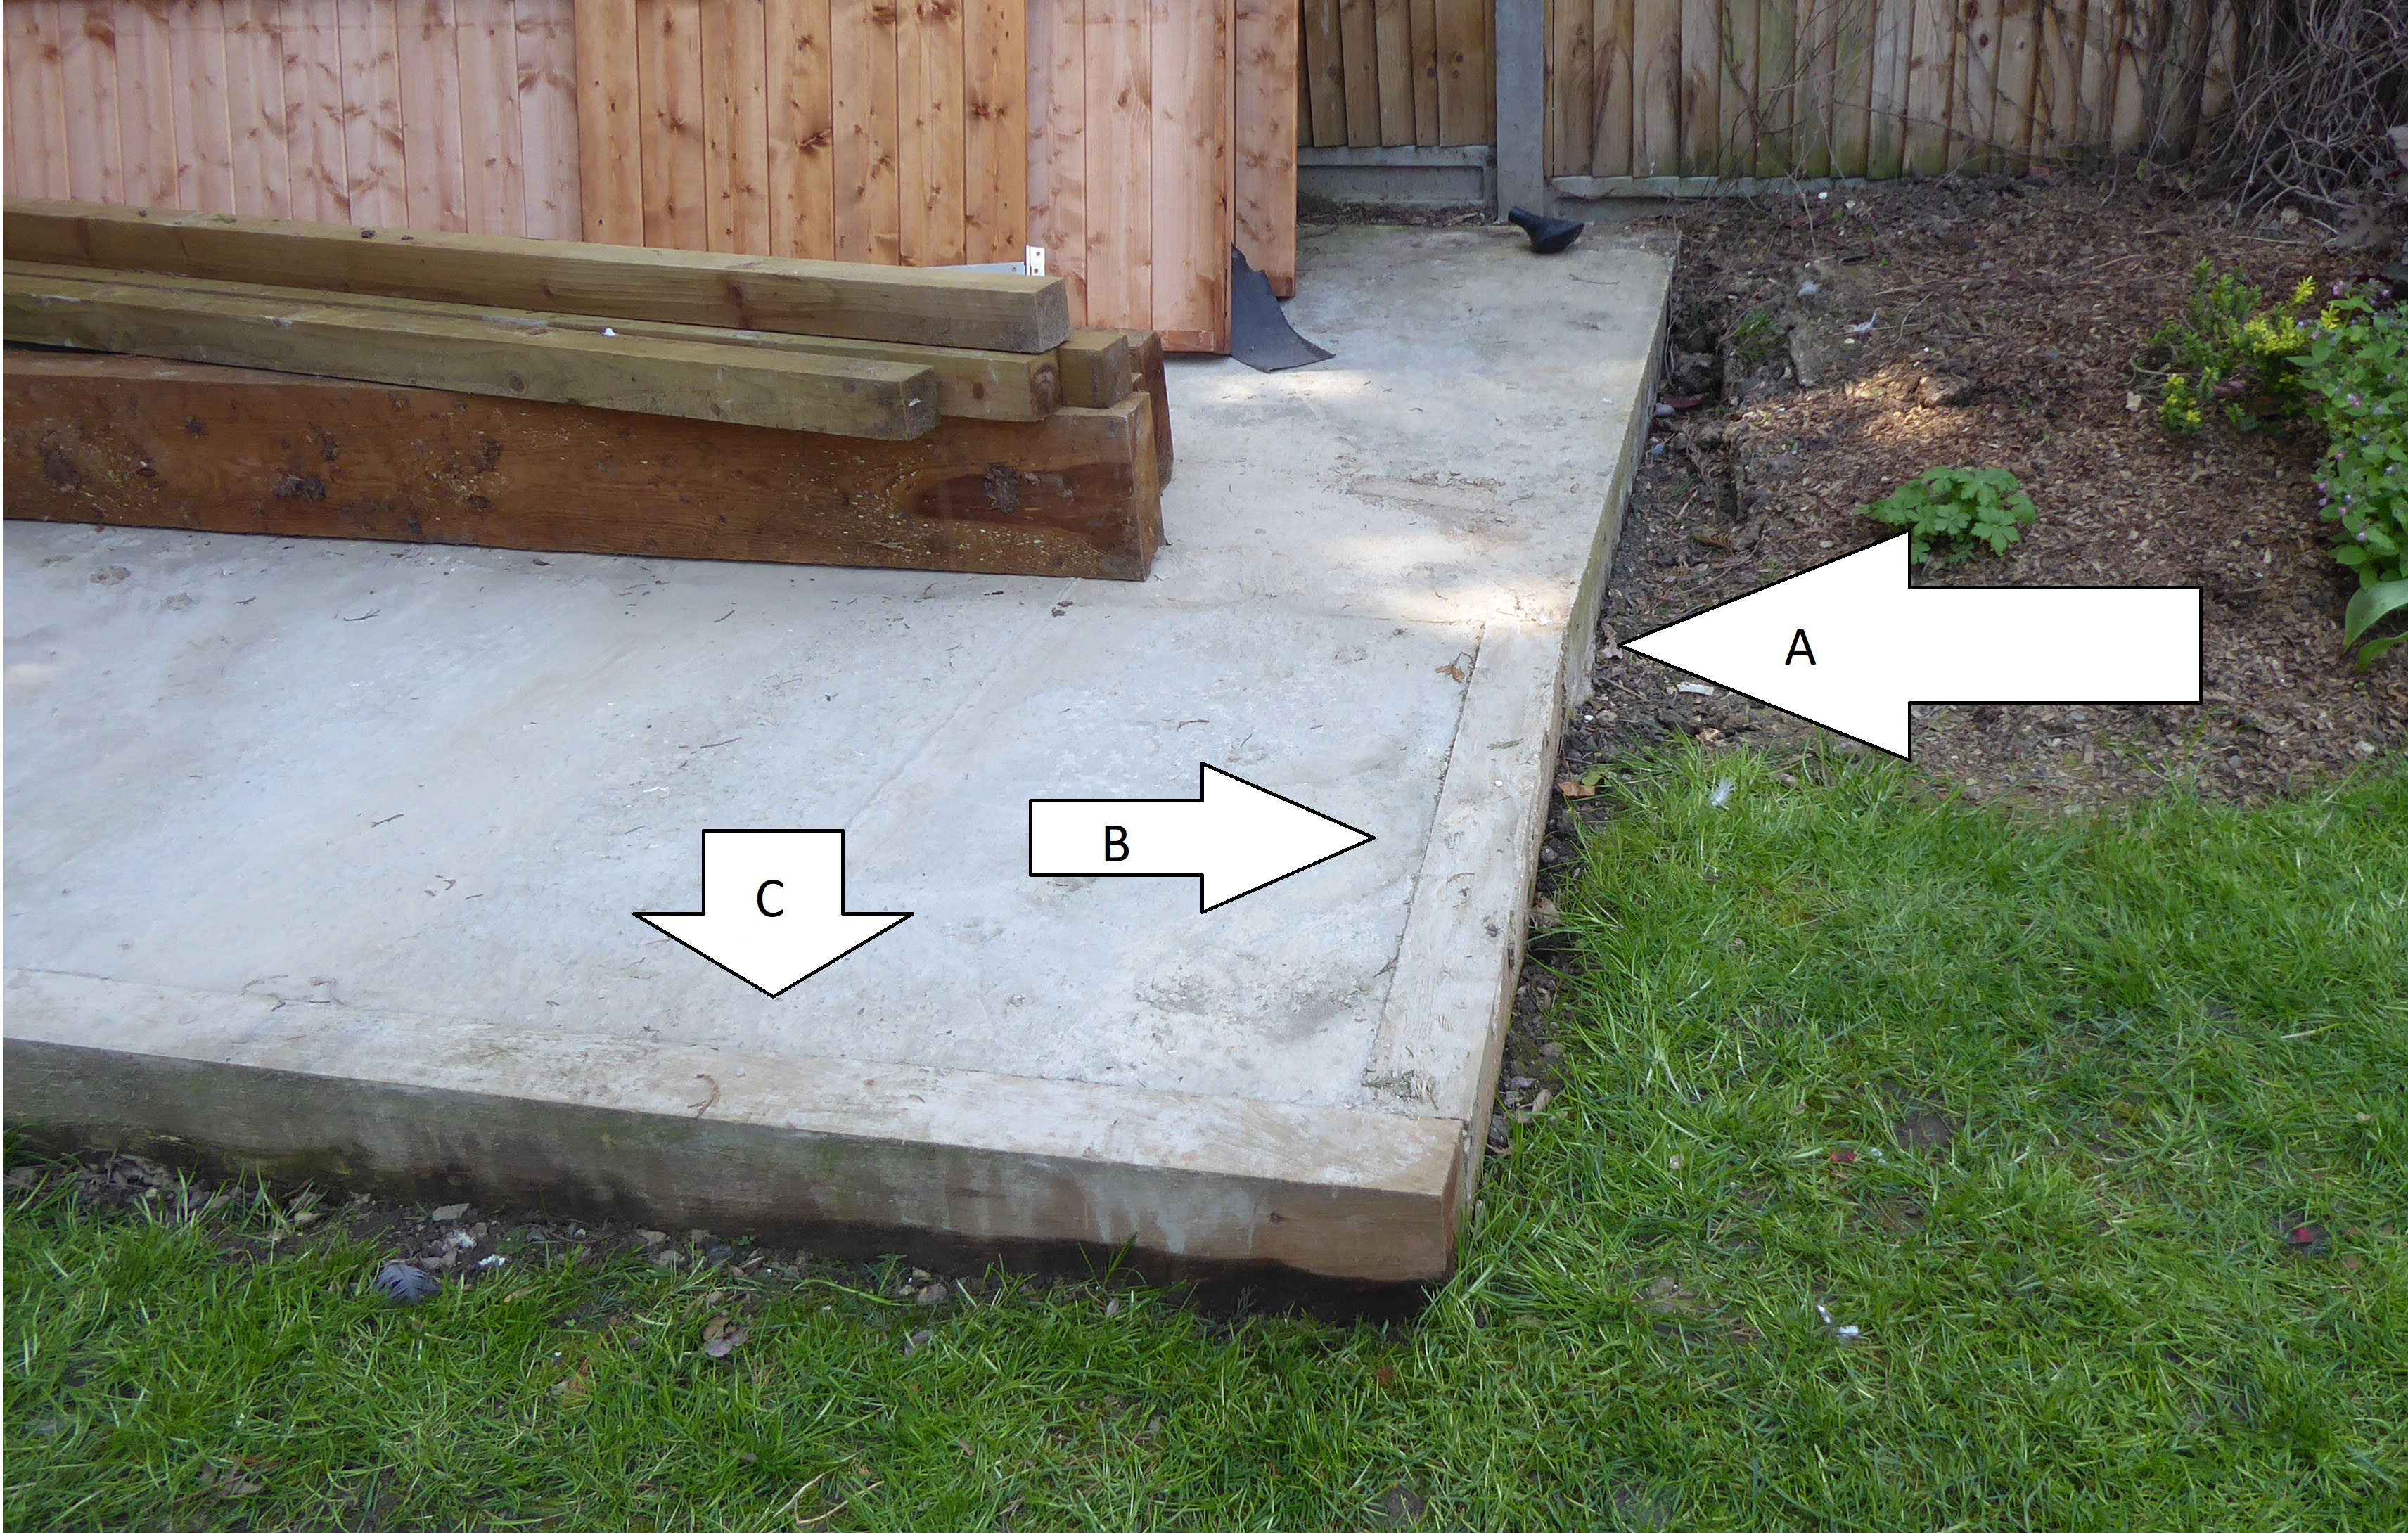 concrete foundation with arrows pointing to certain sections